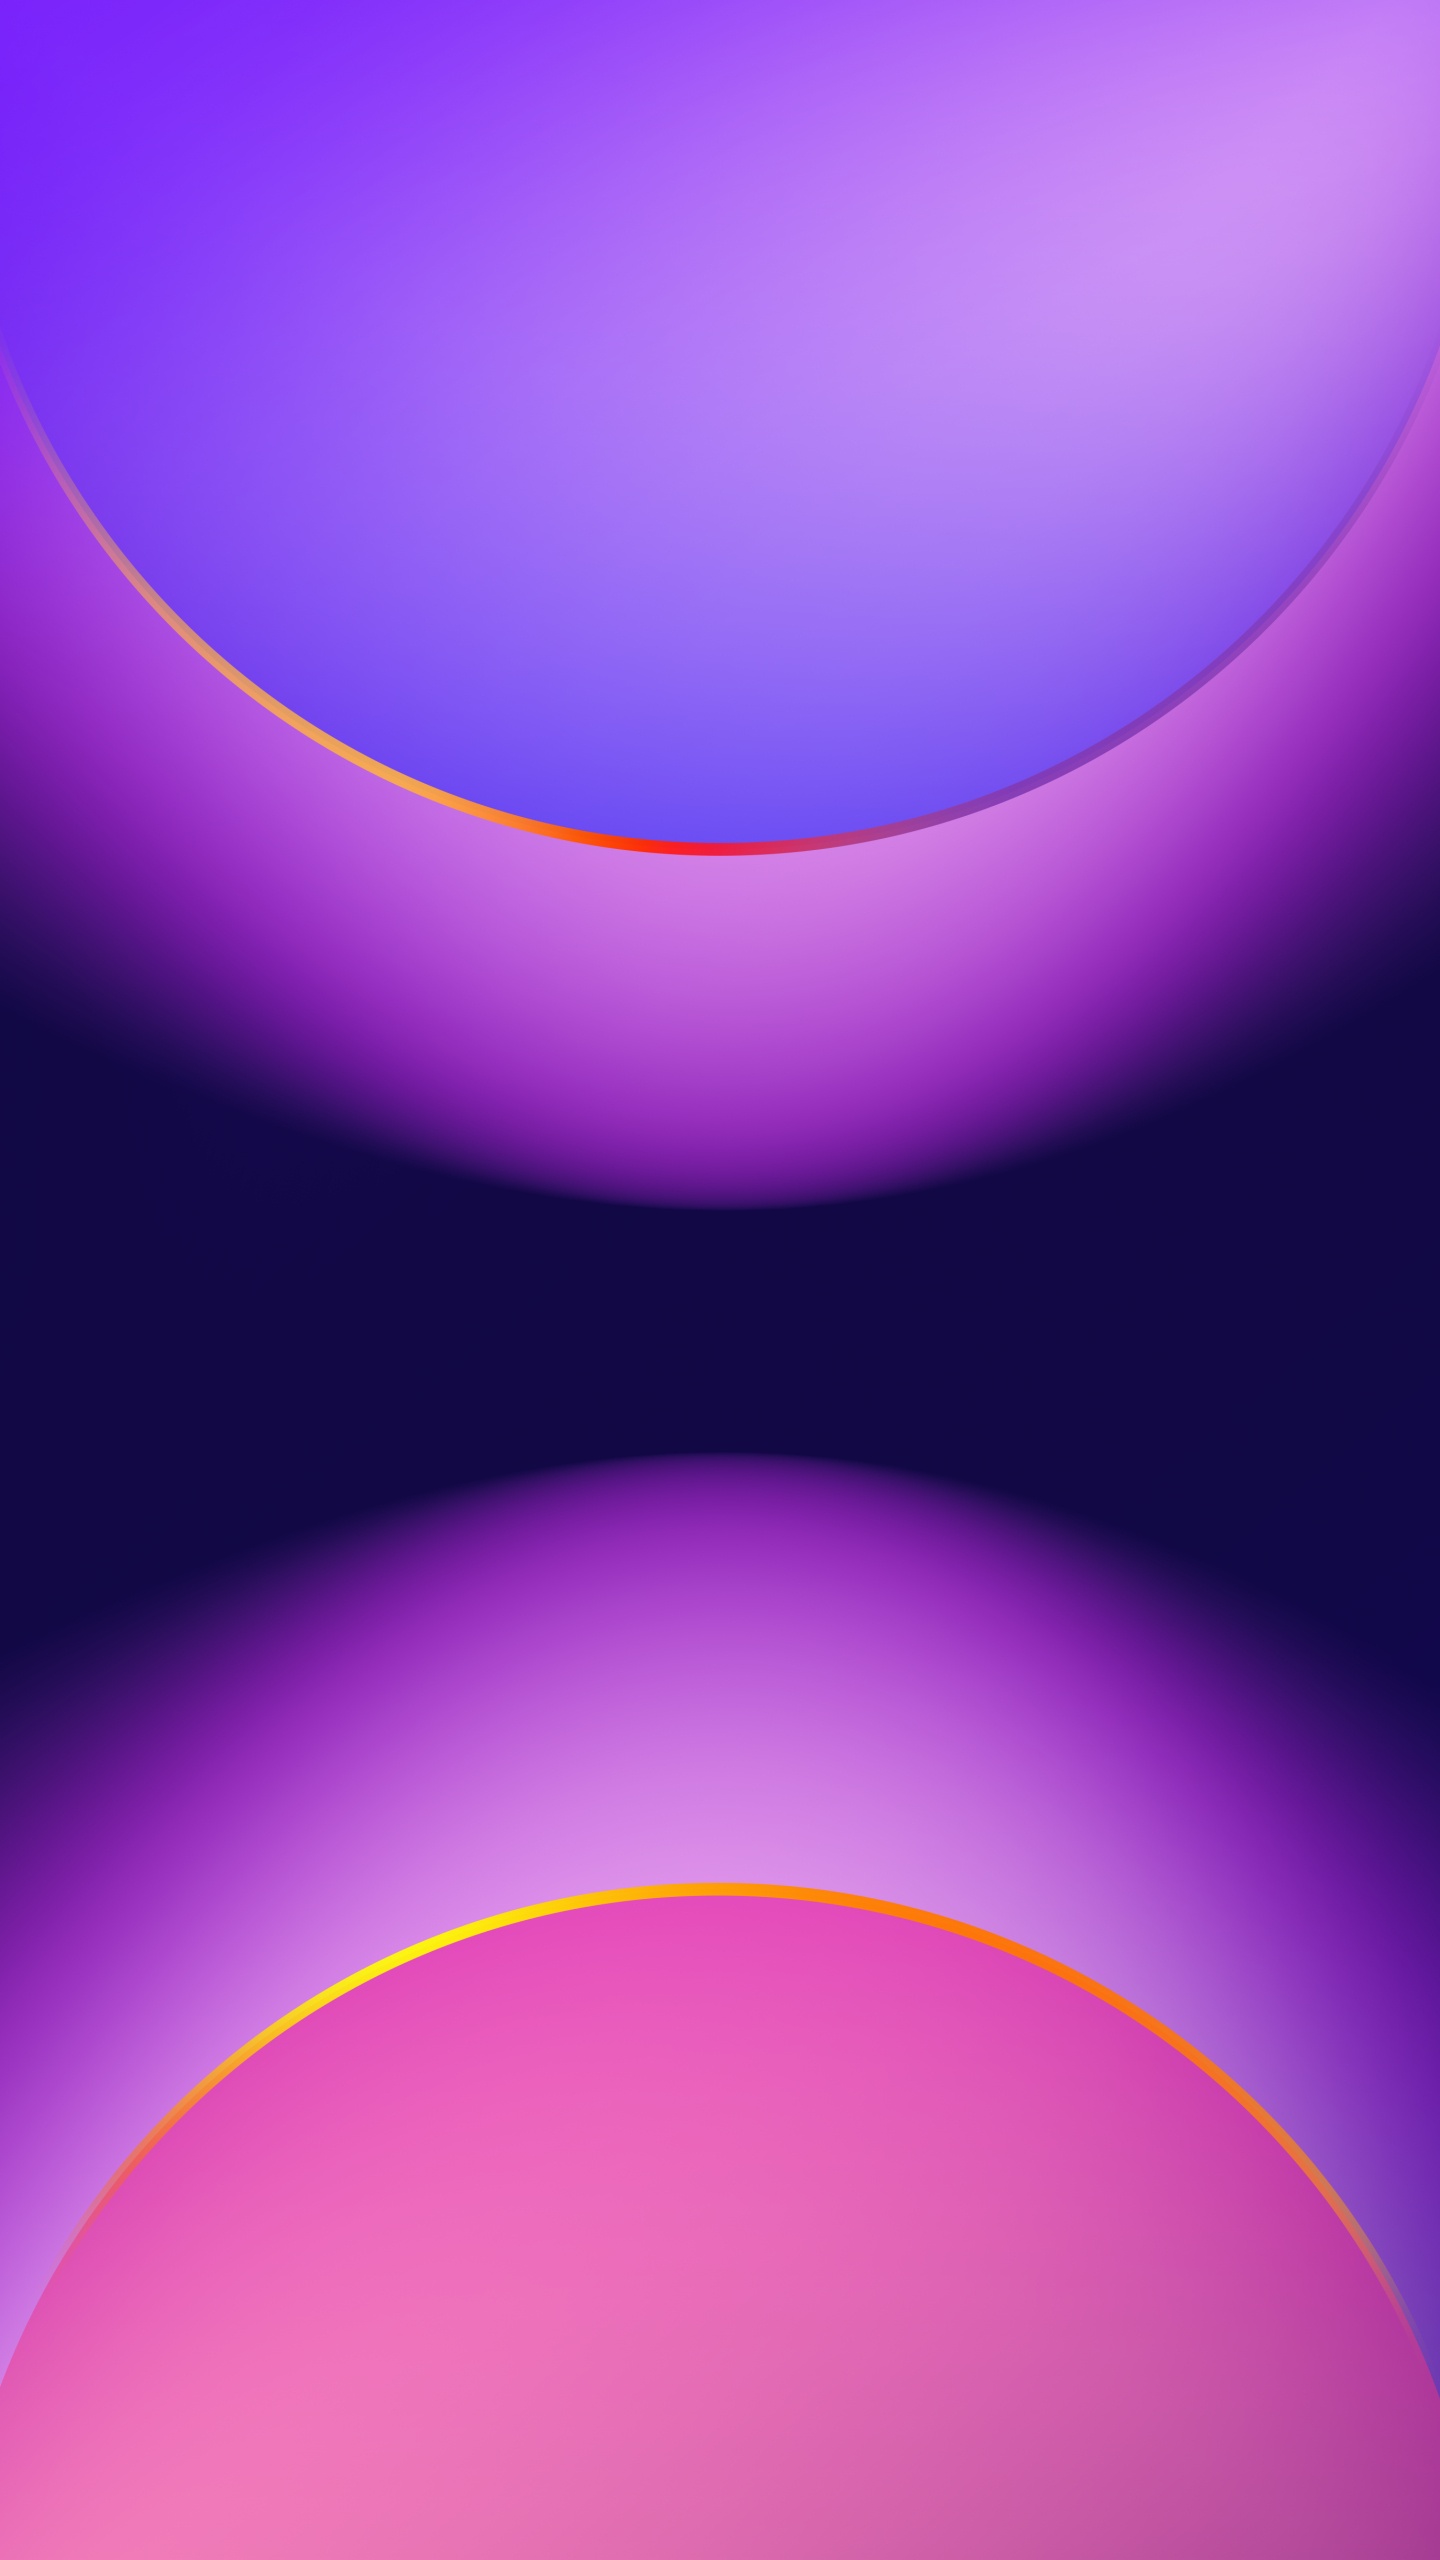 Circle, Apples, Ios, Colorfulness, Purple. Wallpaper in 1440x2560 Resolution